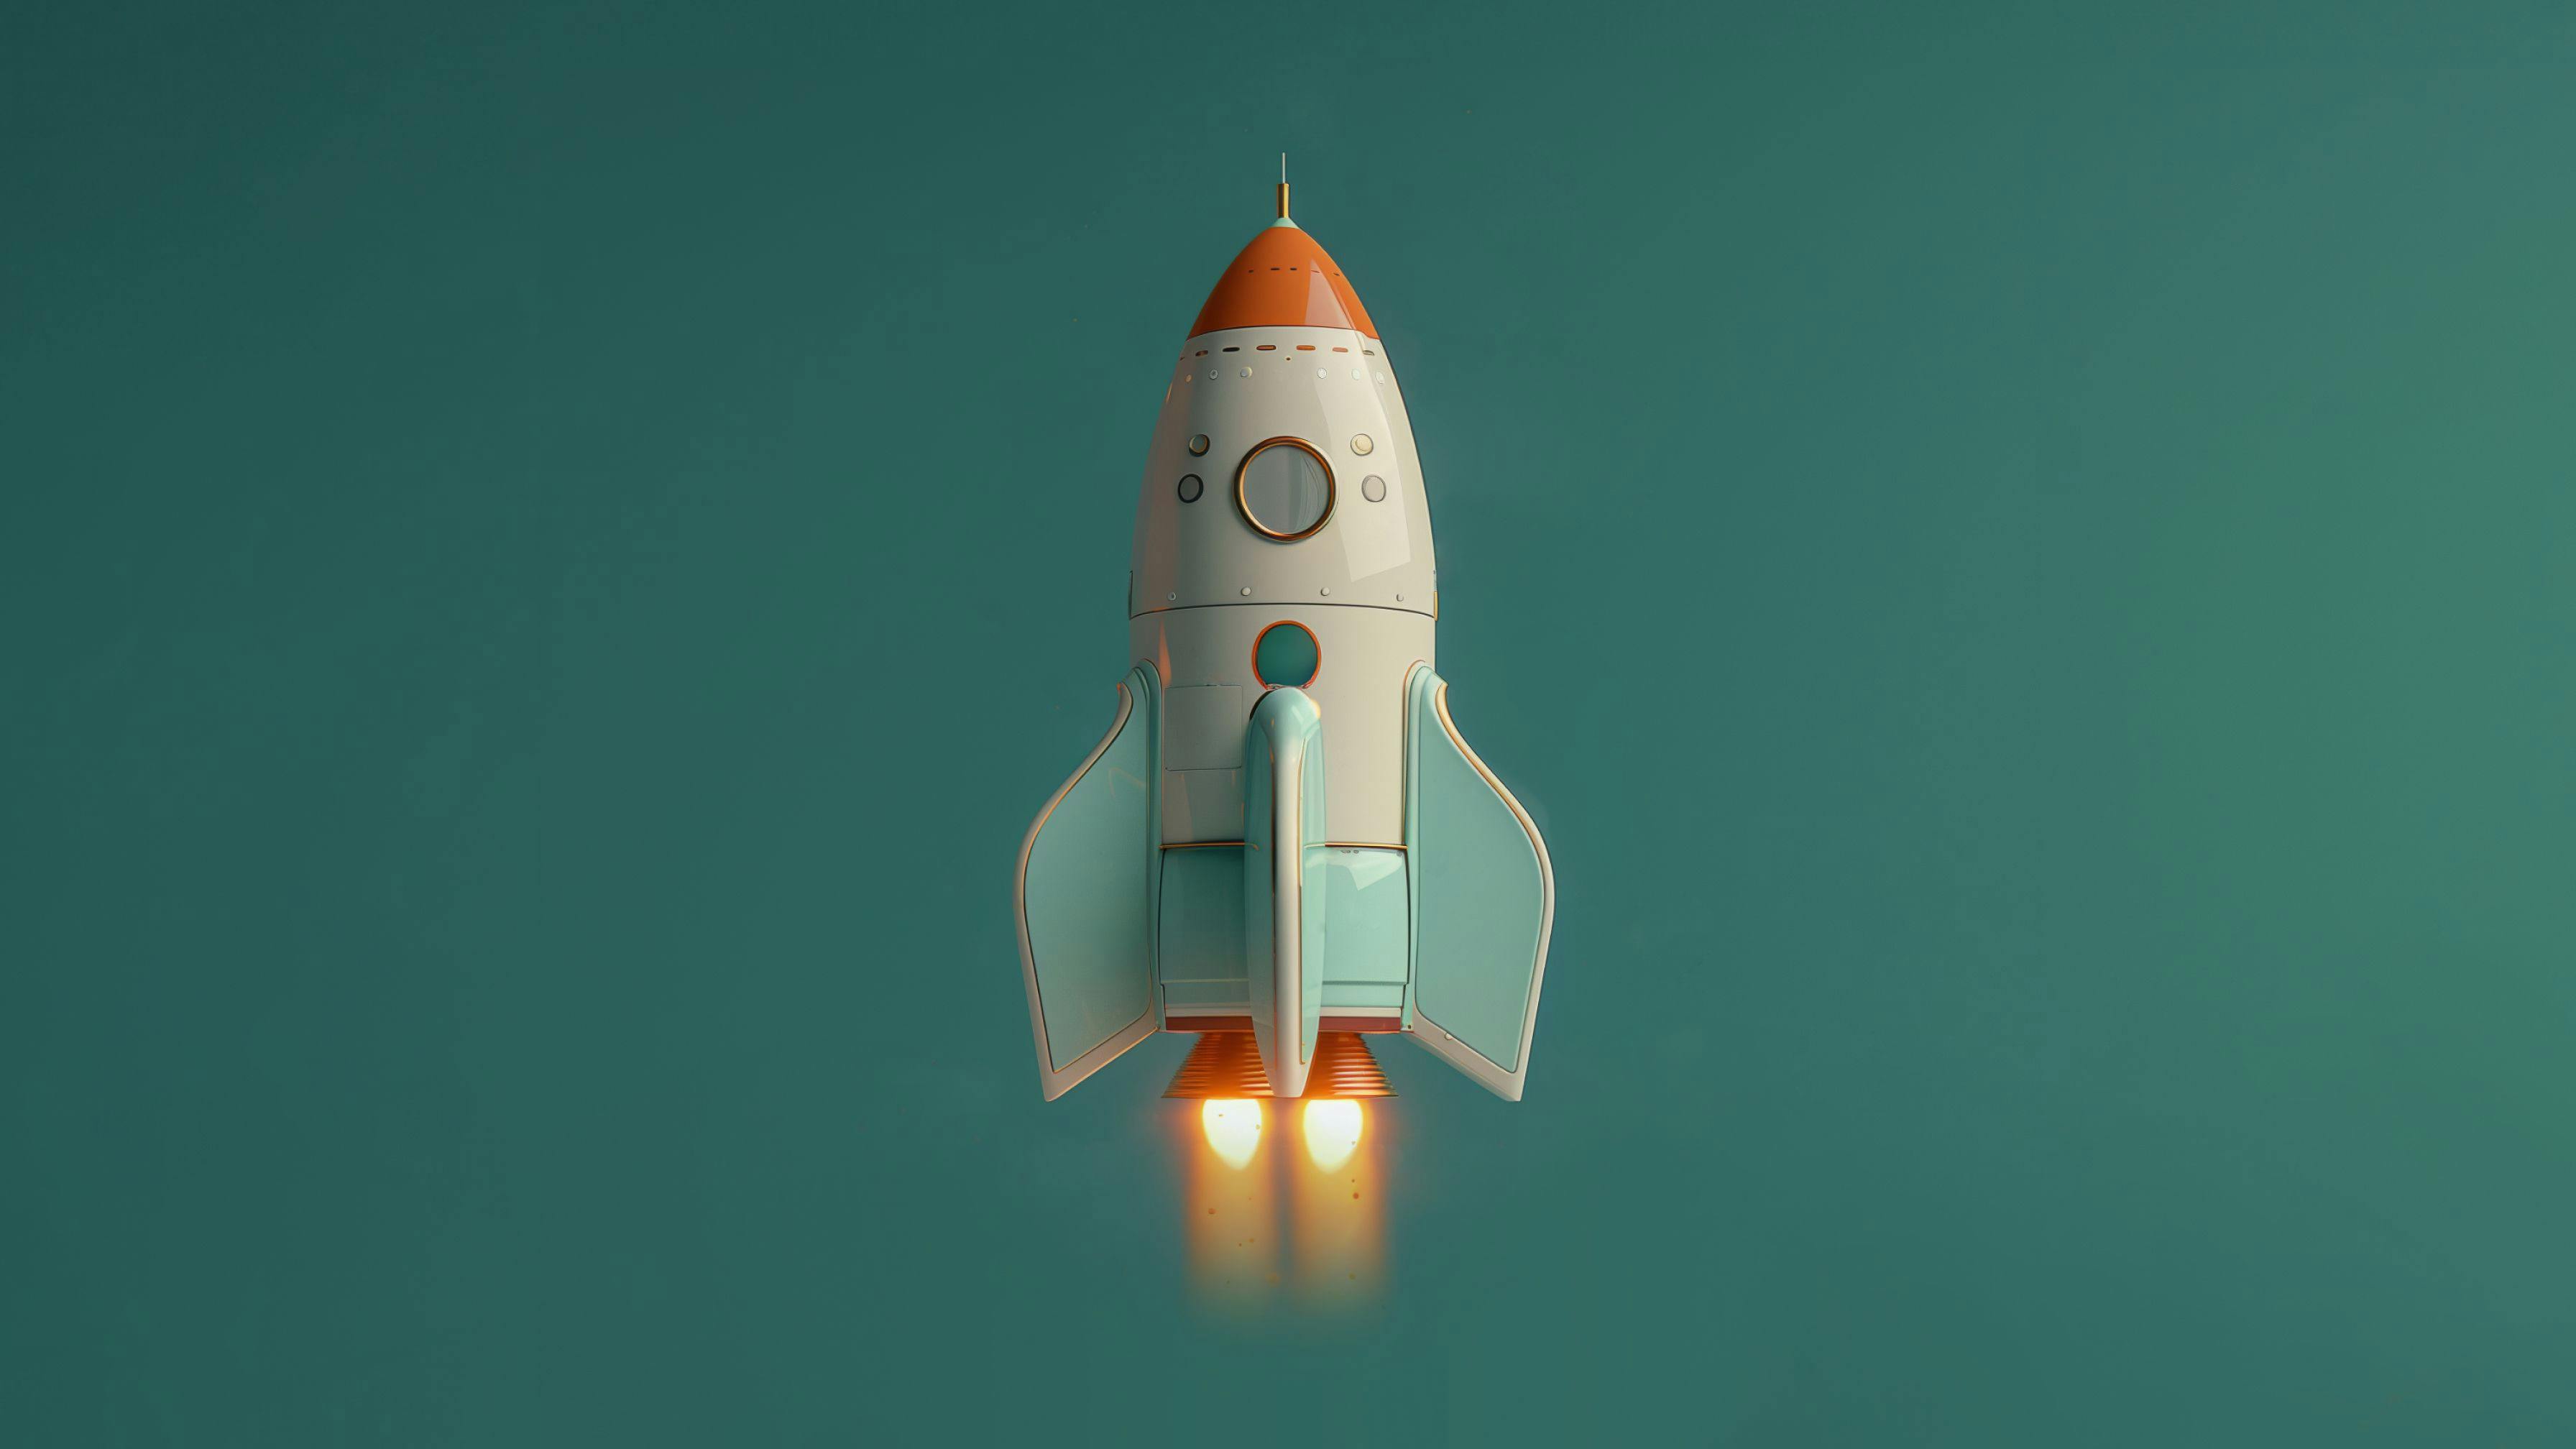 3d space rocket model beige and green tones minimal and monochrome background